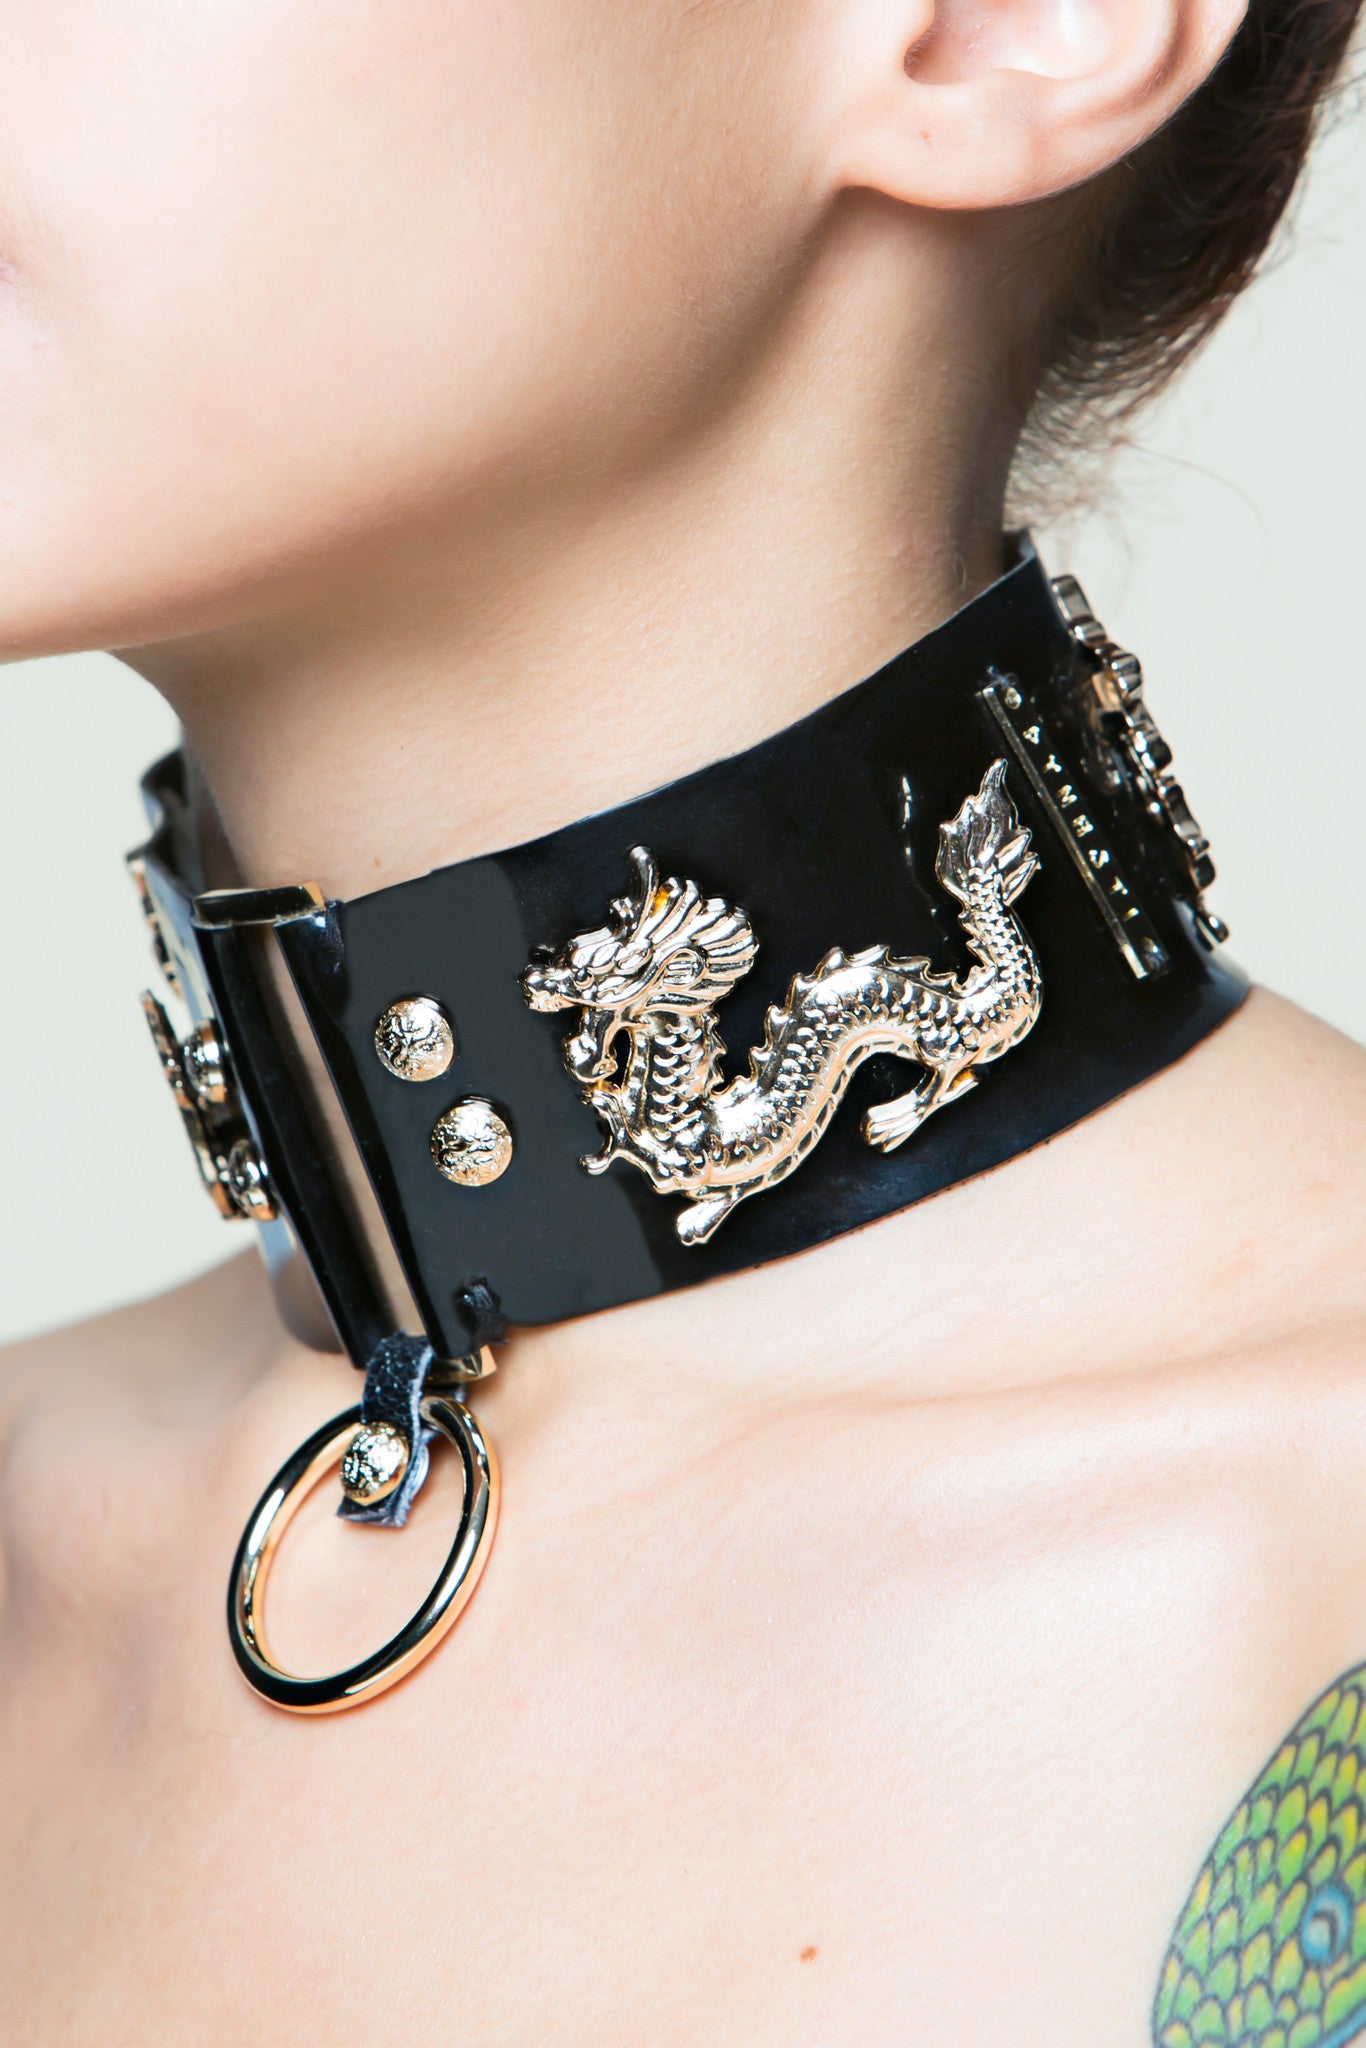 Forbidden Sex Leather Collar With Gold Hardware Dynasti